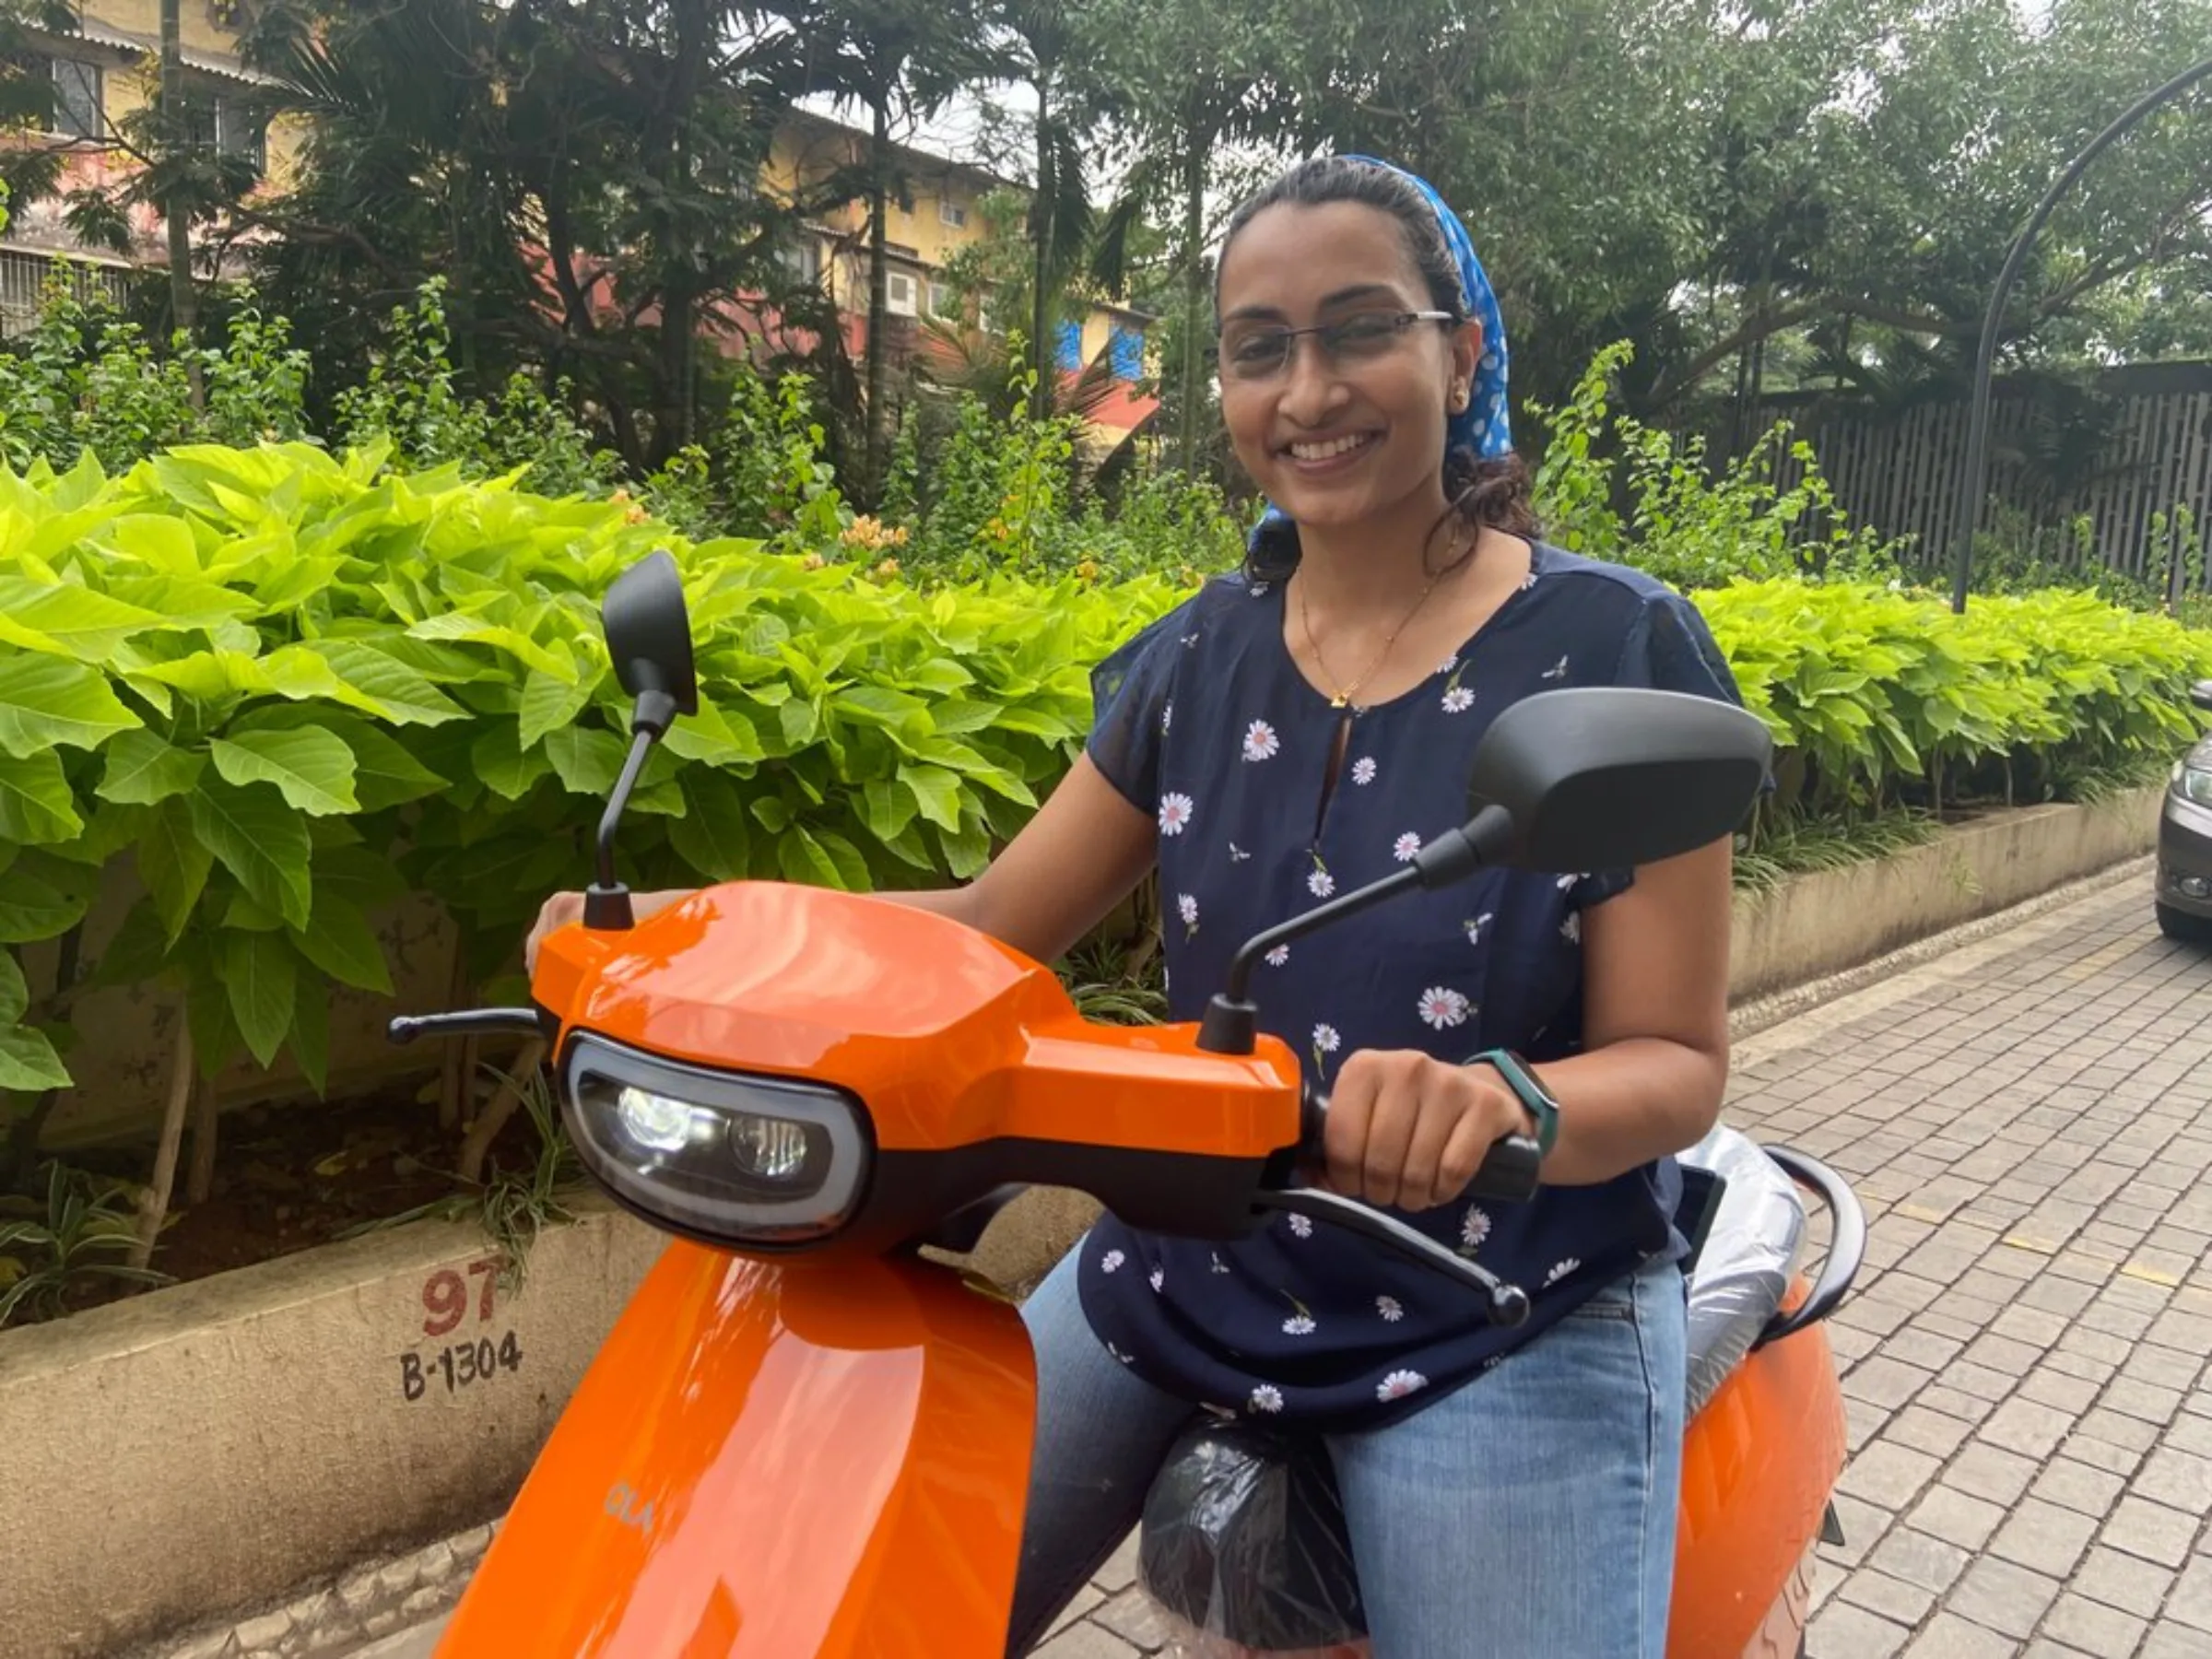 Rajni Arun Kumar poses with her new electric scooter at a residential complex in Mumbai, India, April 21, 2022